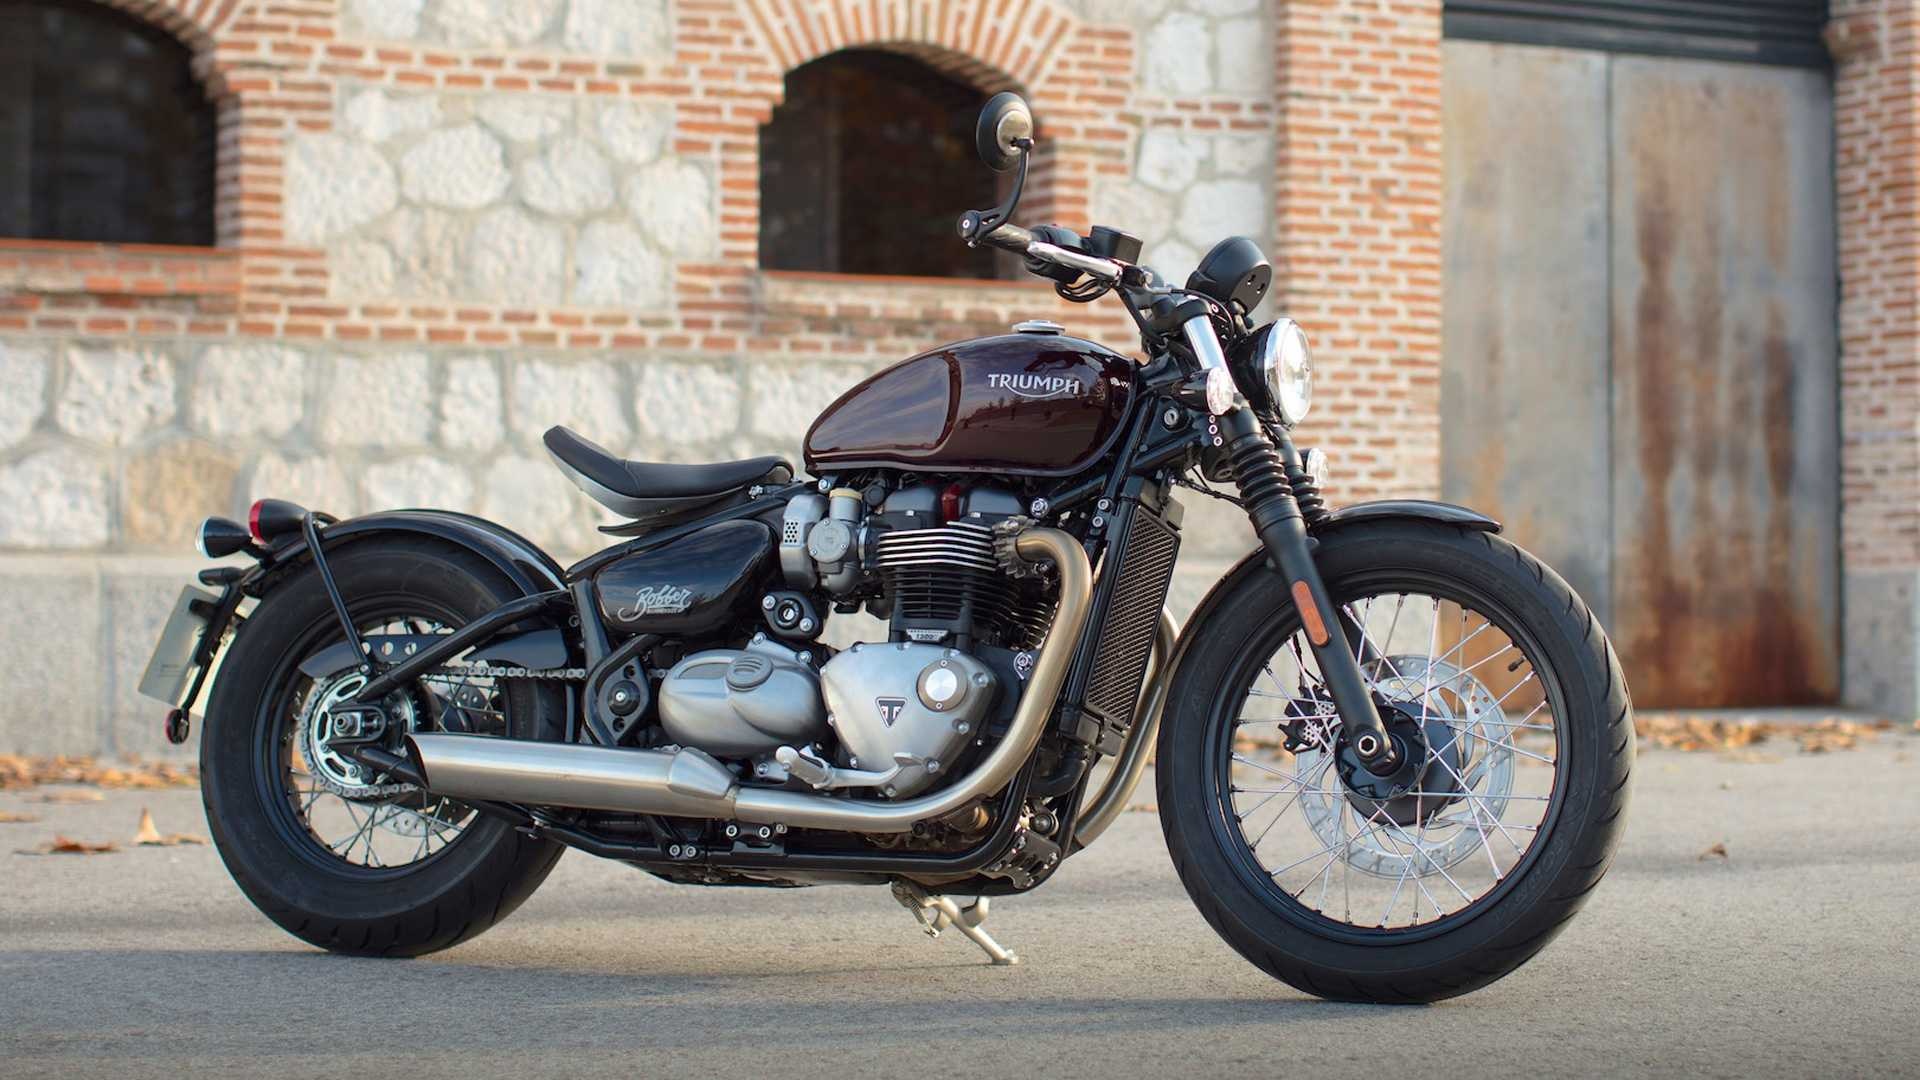 Triumph Bobber, News and reviews, Latest updates, Classic and modern fusion, 1920x1080 Full HD Desktop